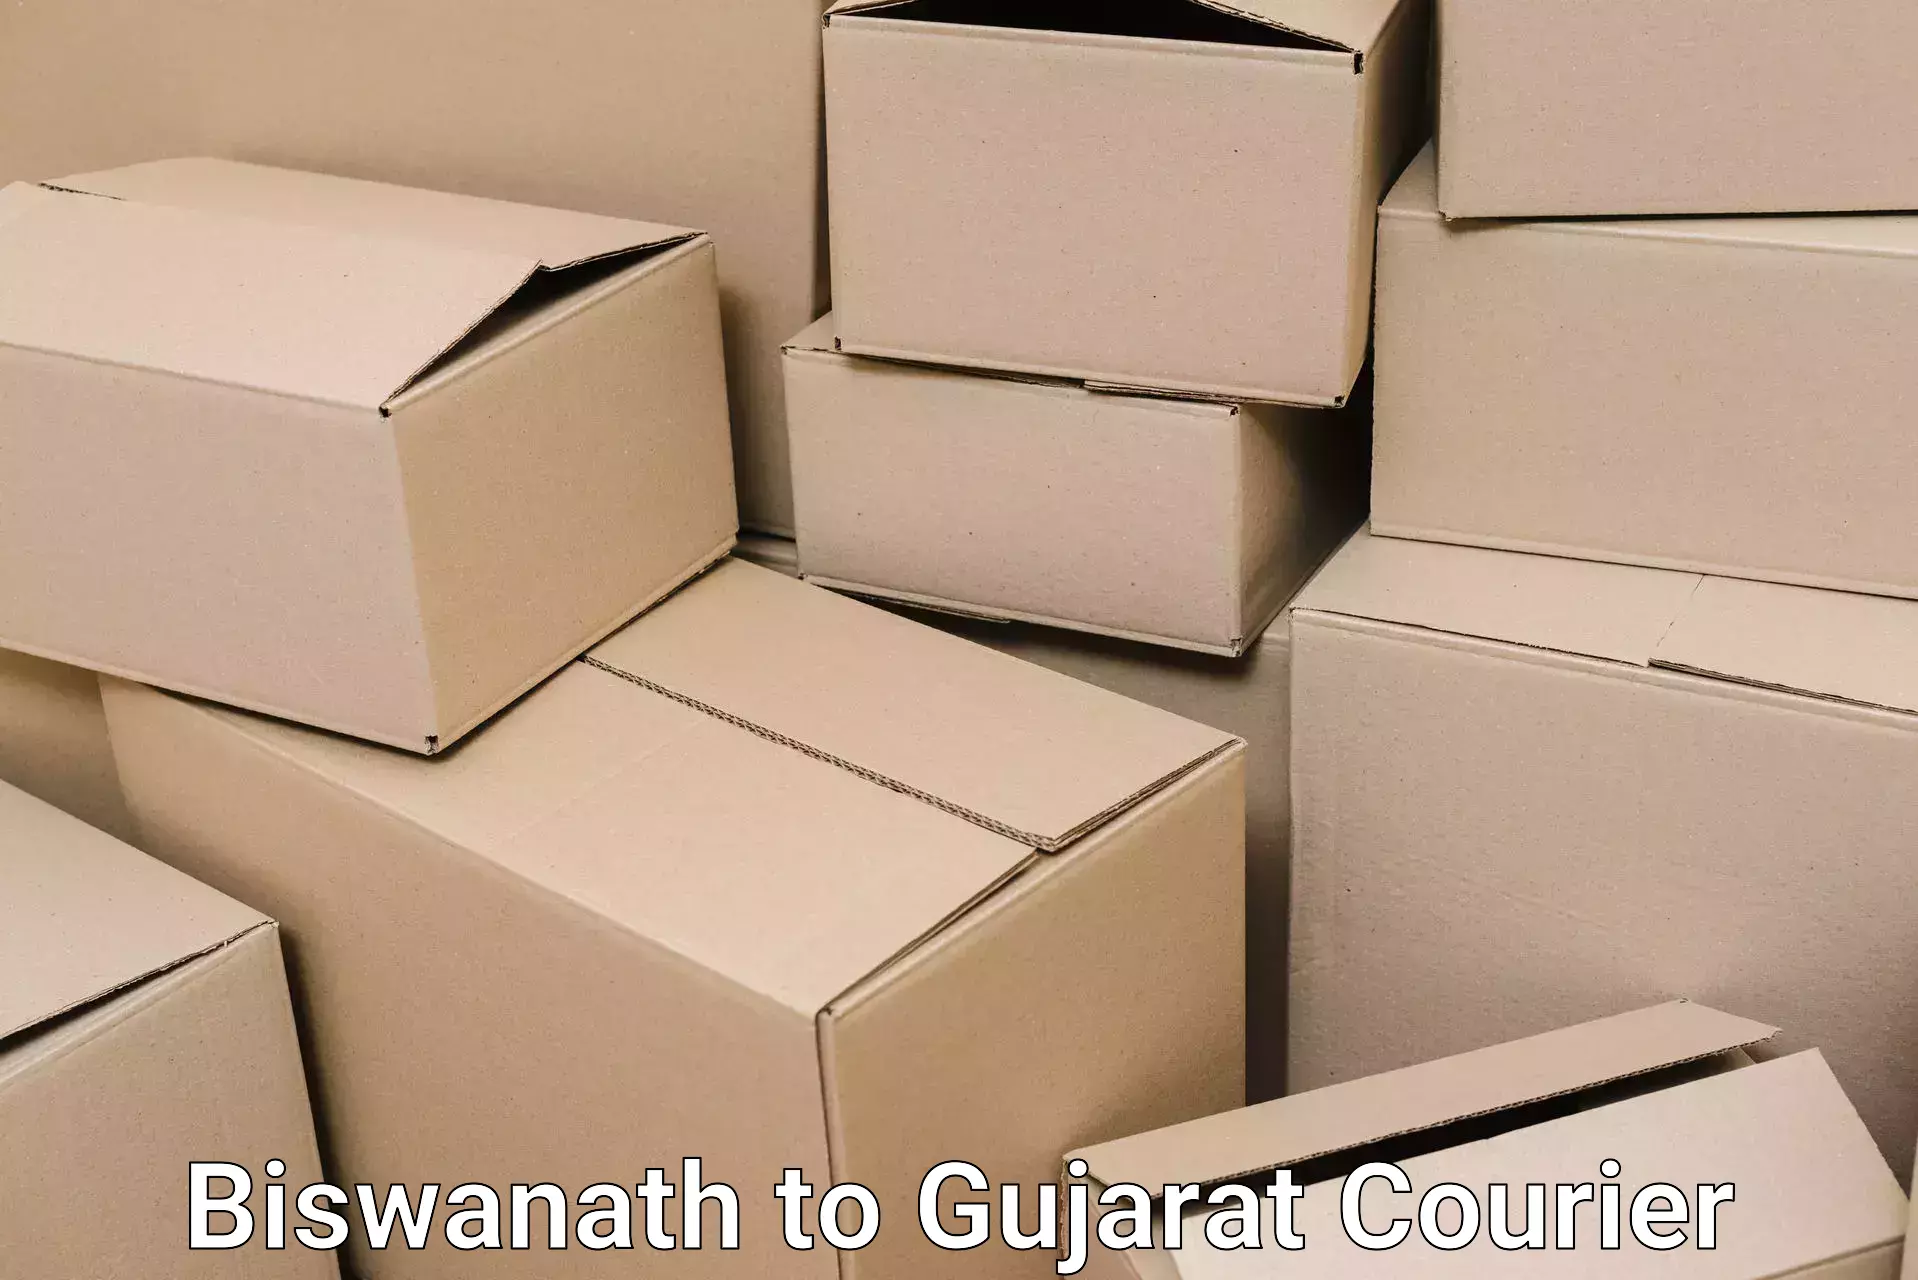 Quality relocation assistance in Biswanath to Dharmaram